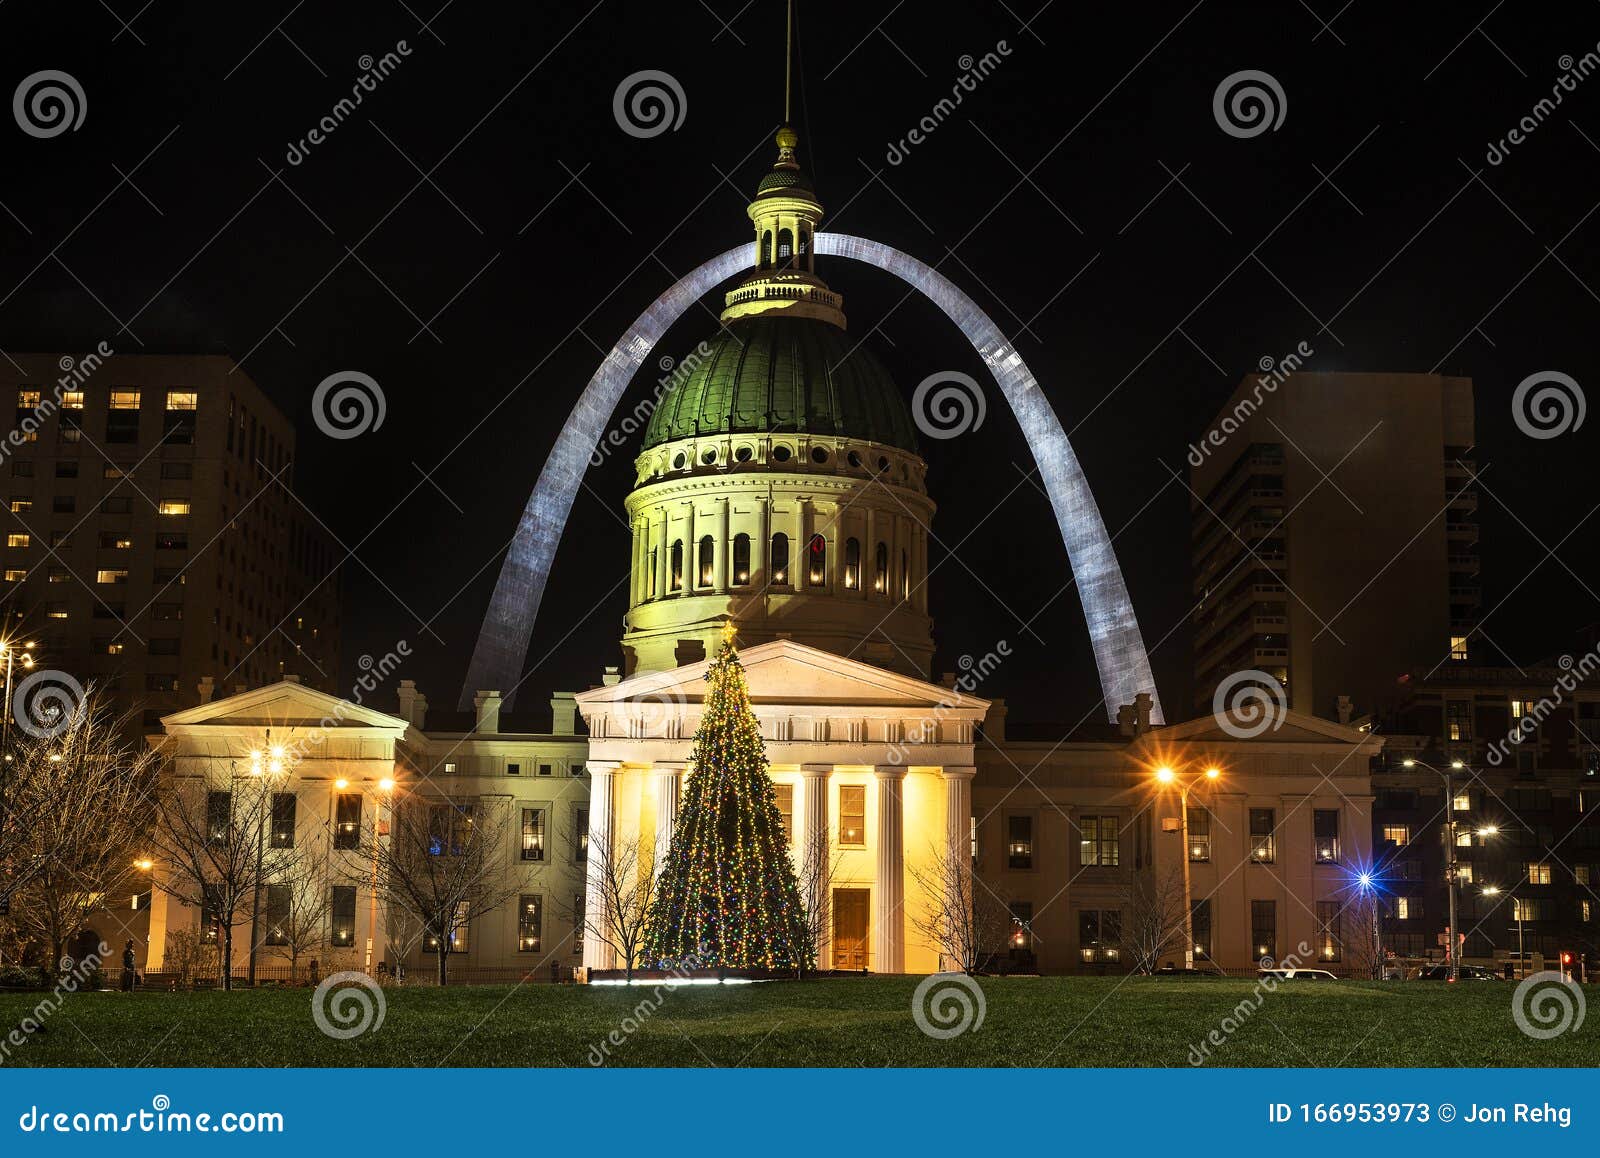 St Louis, Missouri, Dec 2019 - St Louis Gateway Arch And Old Courthouse At Night With Christmas ...